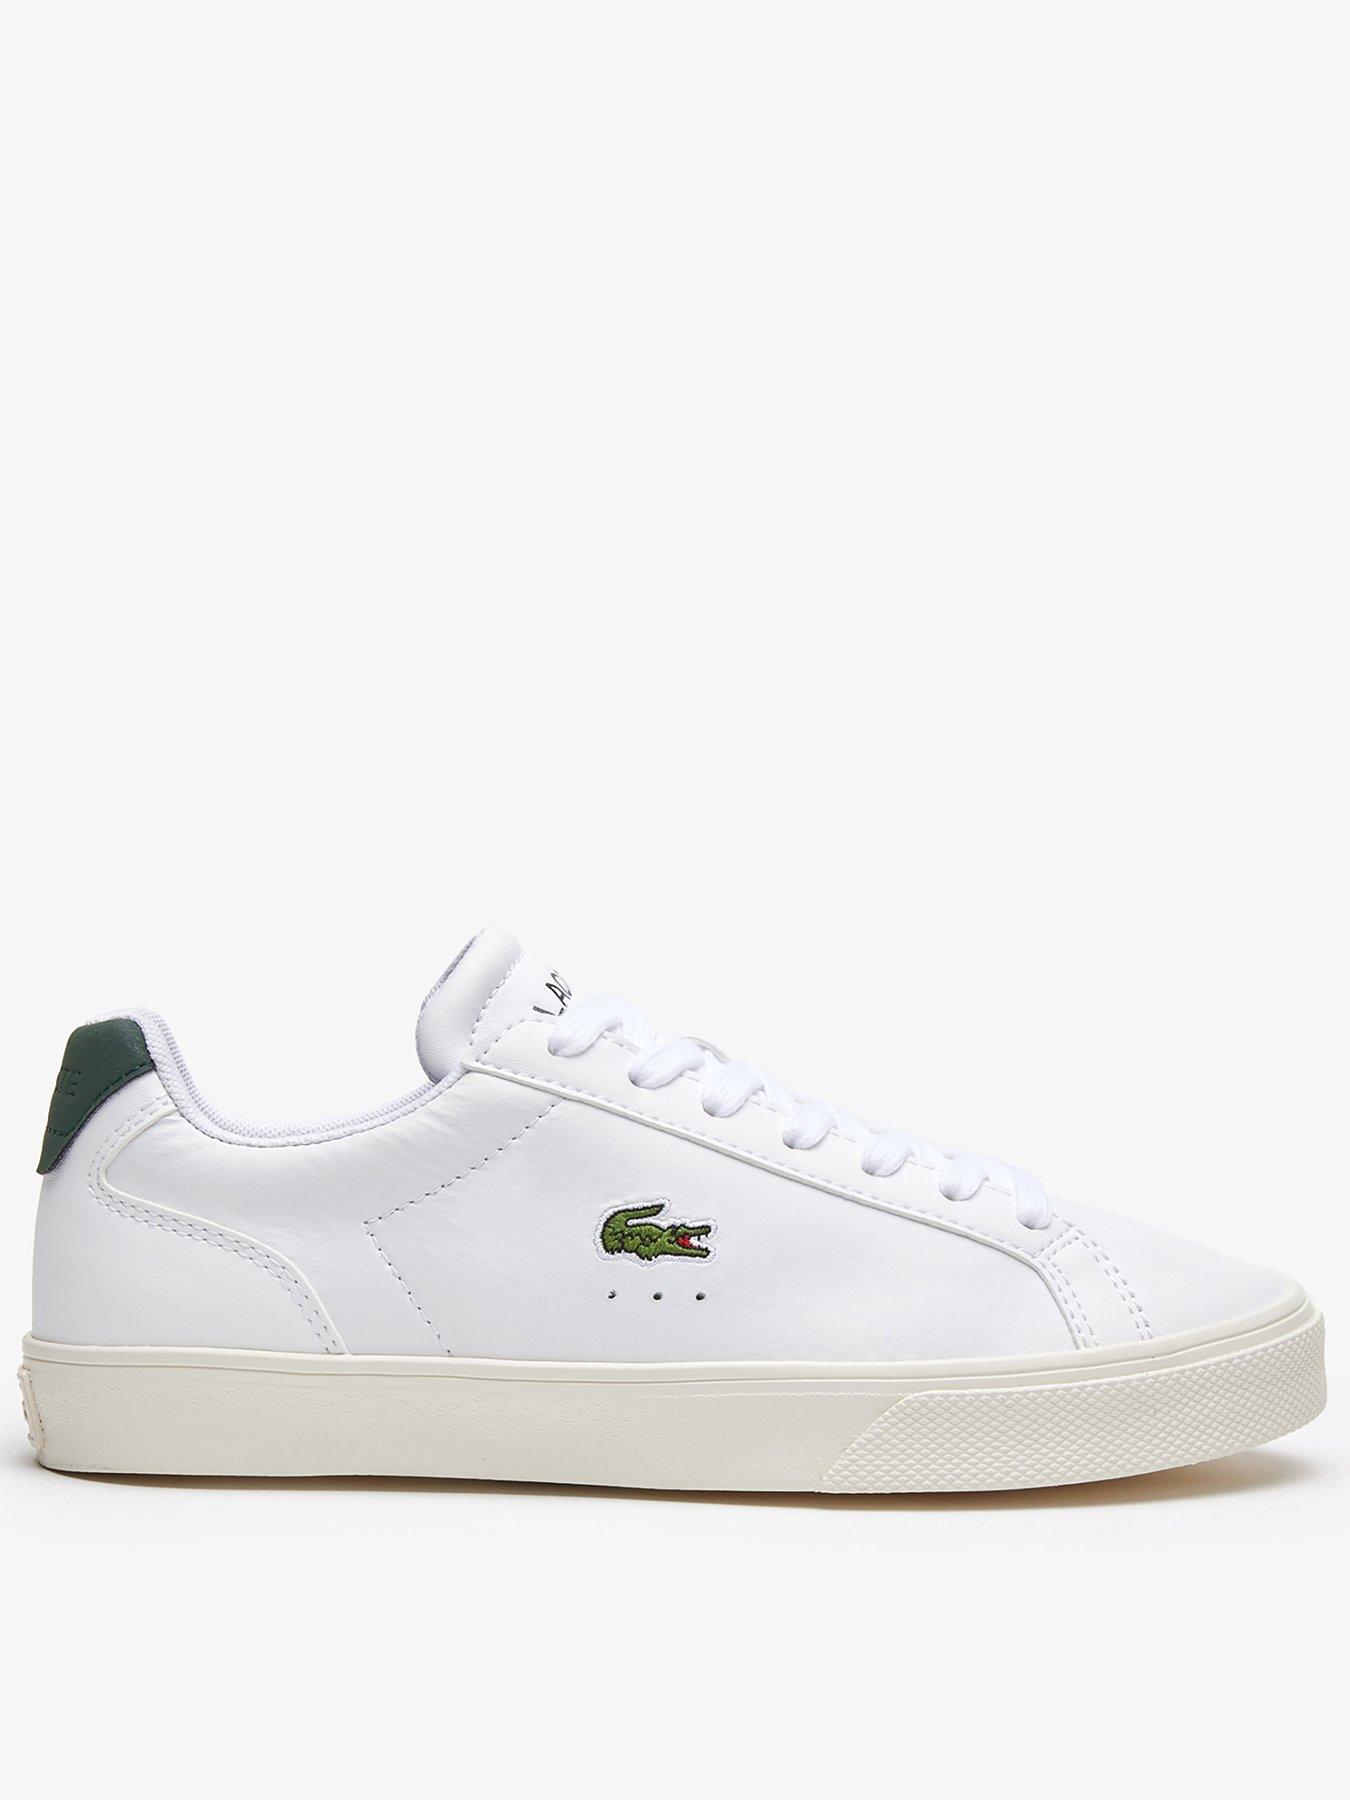 Women's Lerond Trainers - White/Green | very.co.uk